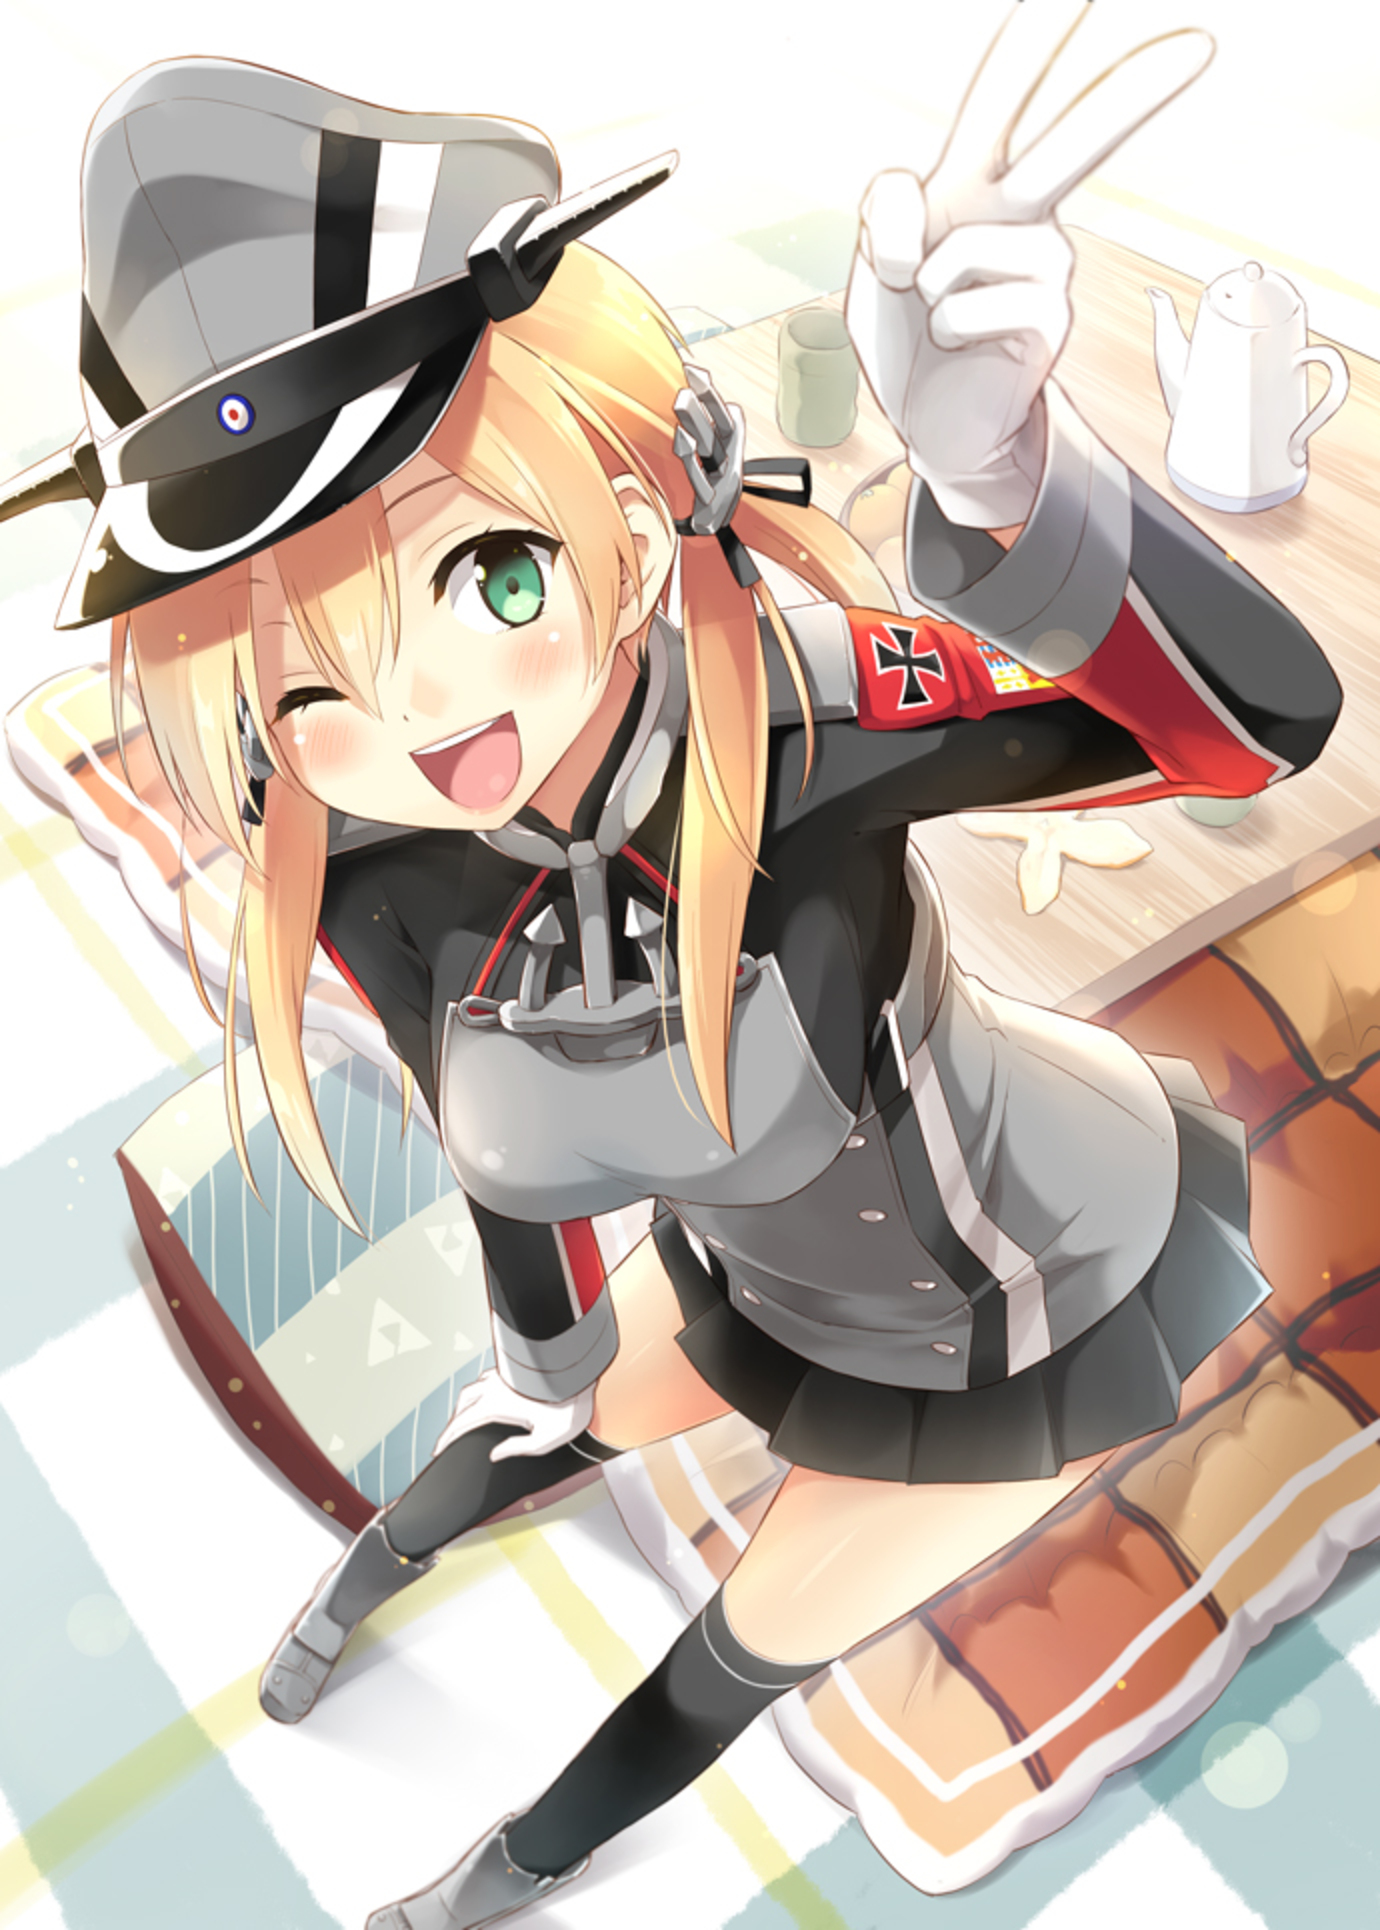 Anime 1380x1930 anime anime girls Kantai Collection Prinz Eugen (KanColle) twintails blonde solo artwork digital art fan art hat peace sign